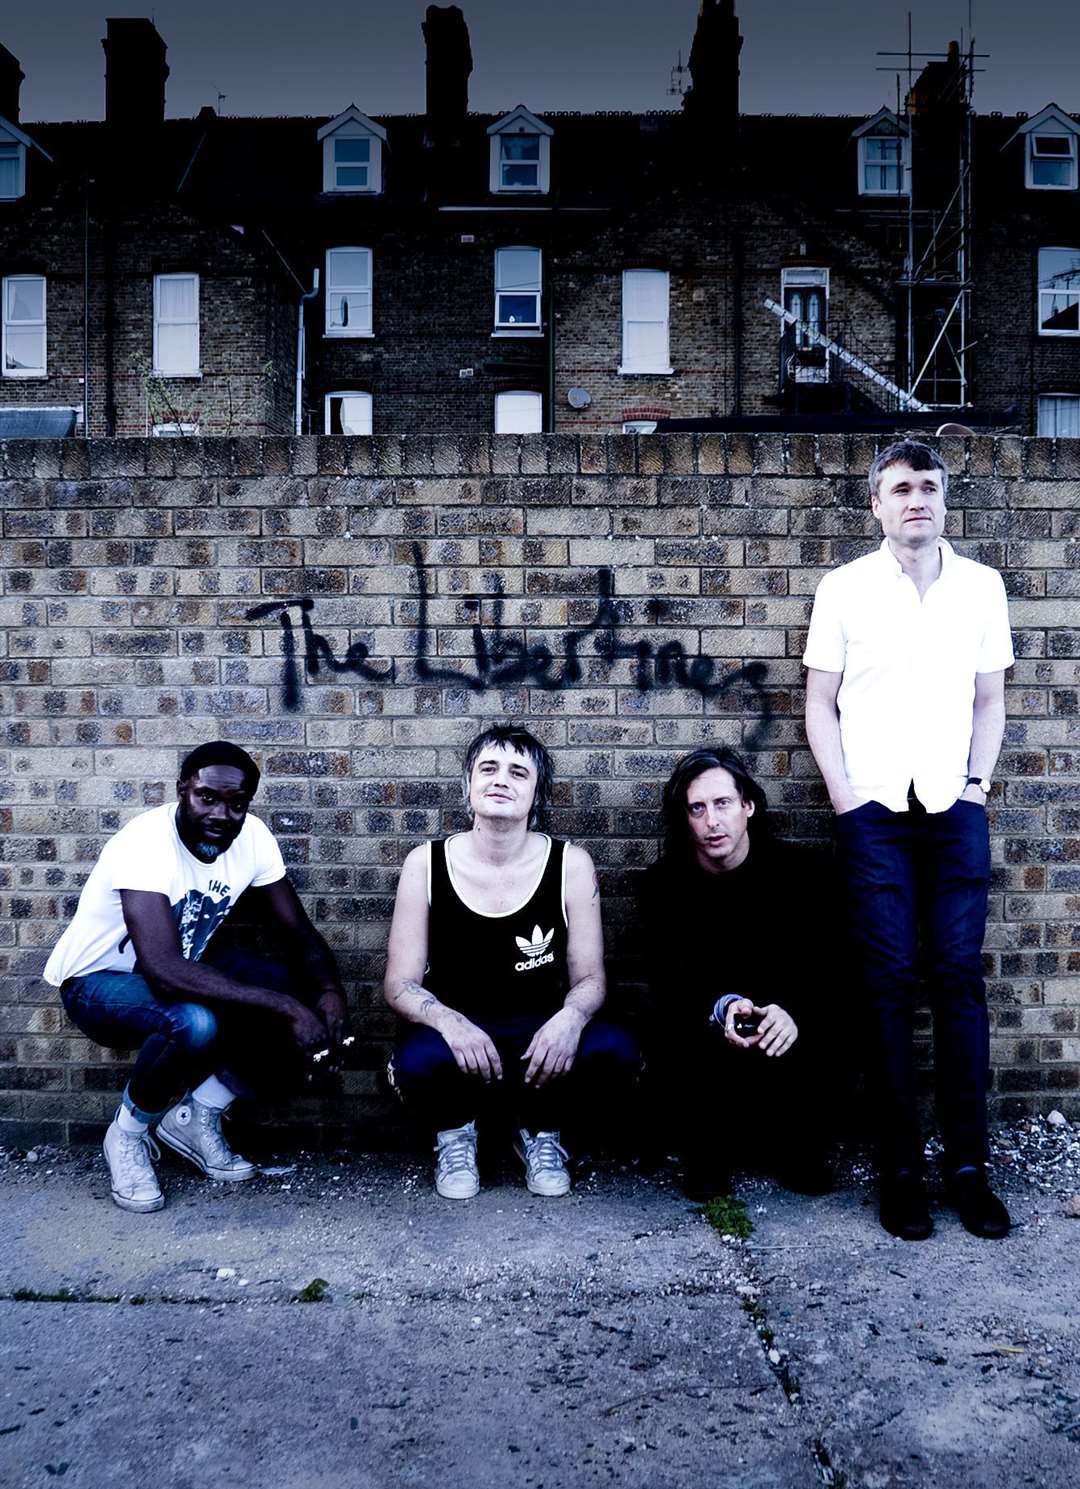 The Libertines will be appearing at the Castle Concerts